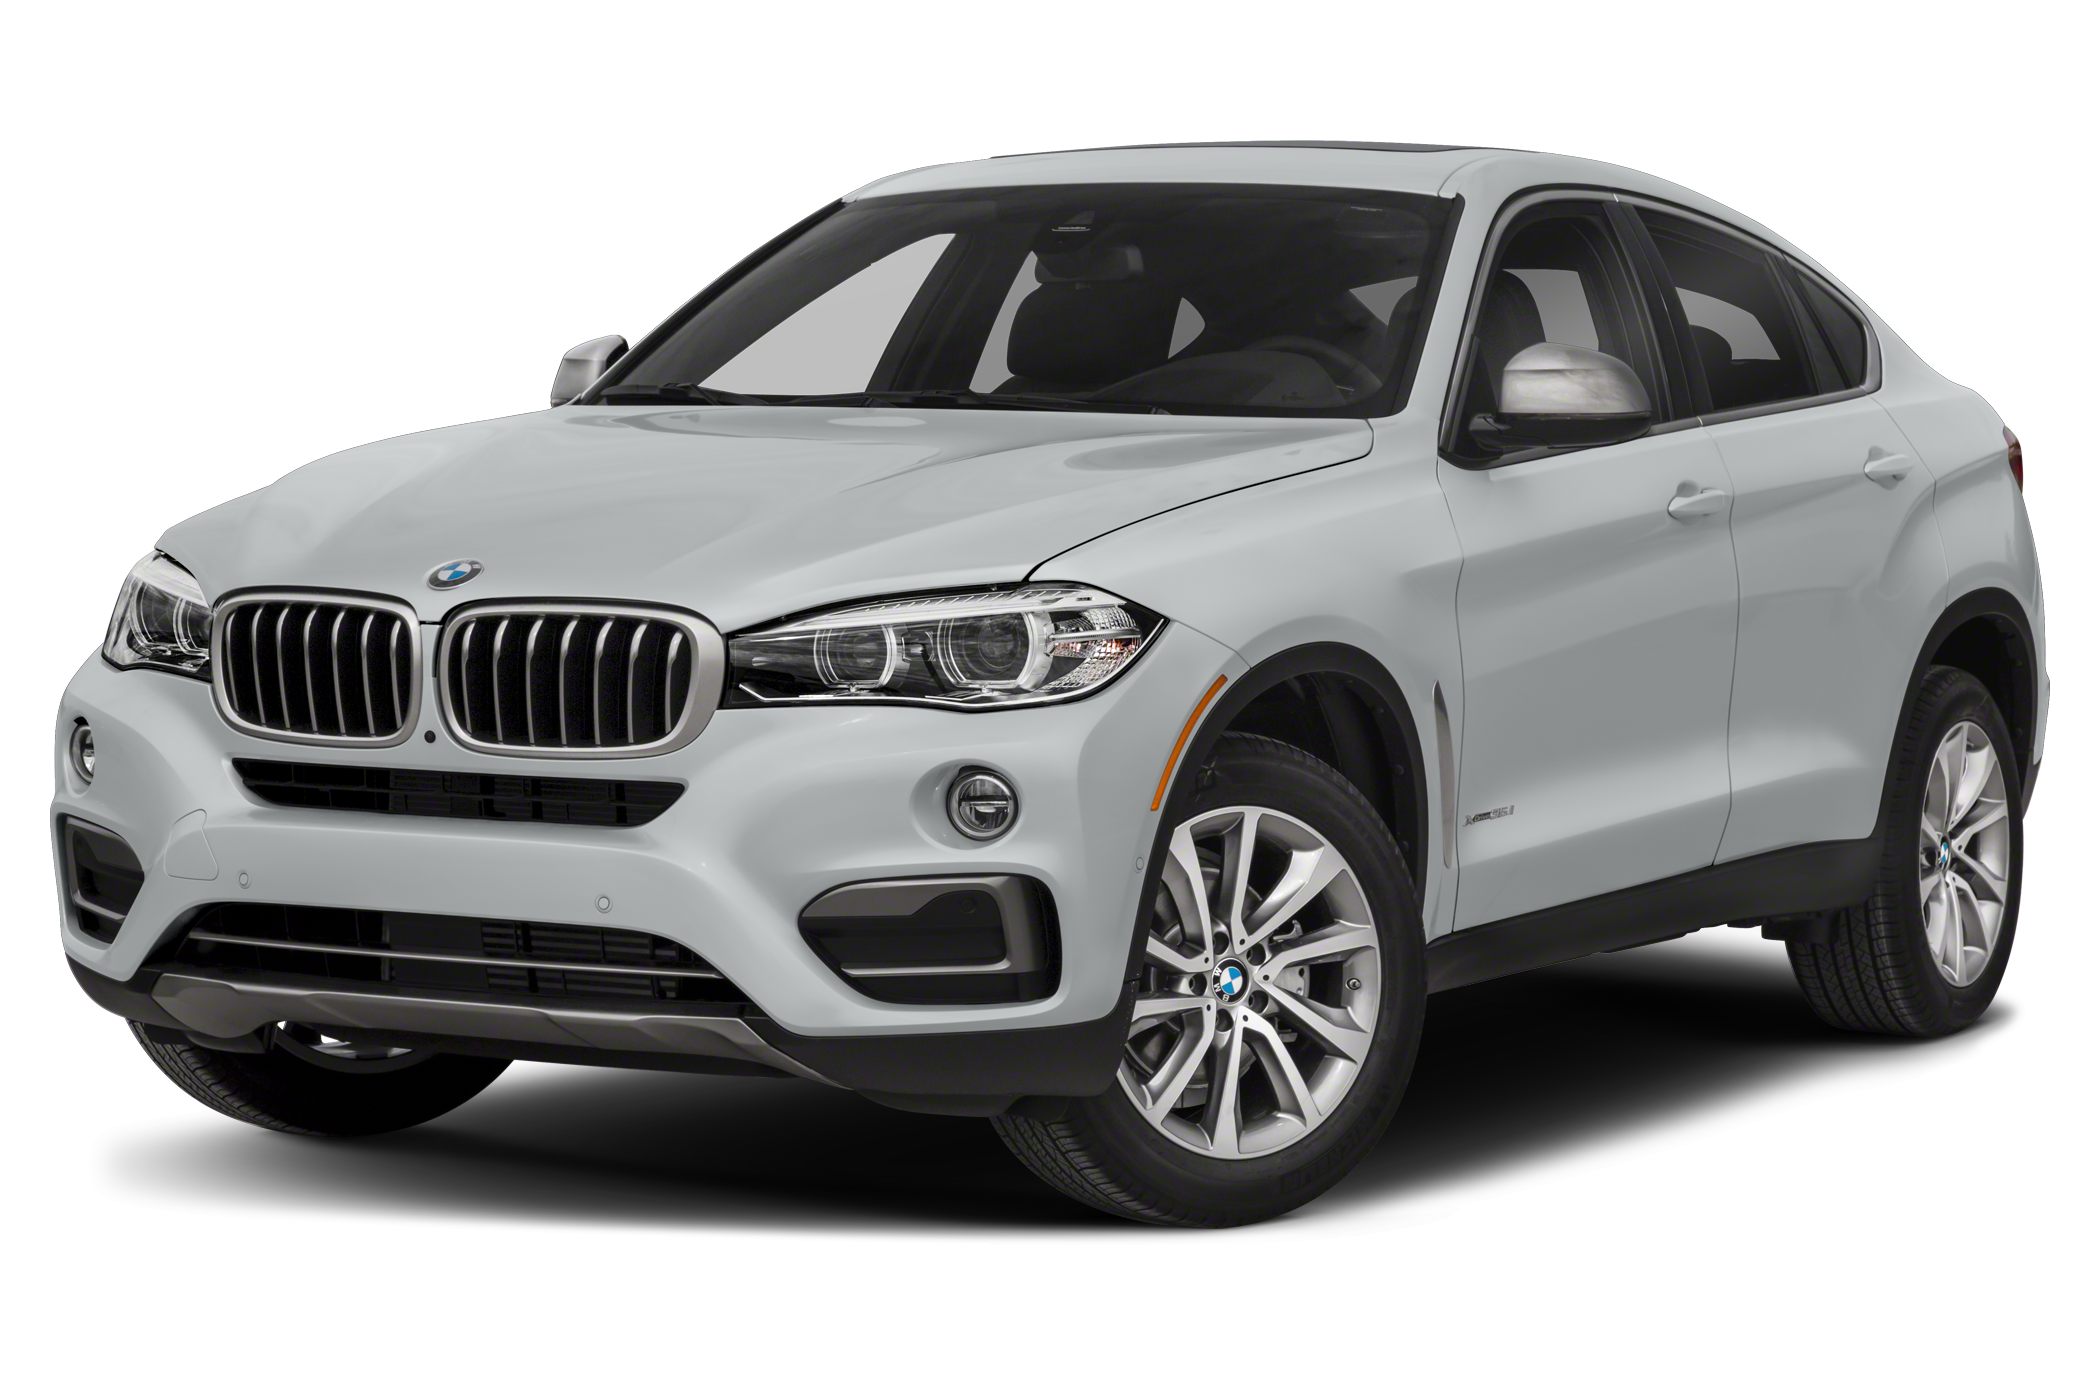 2019 Bmw X6 Xdrive35i 4dr All Wheel Drive Sports Activity Coupe Pricing And Options